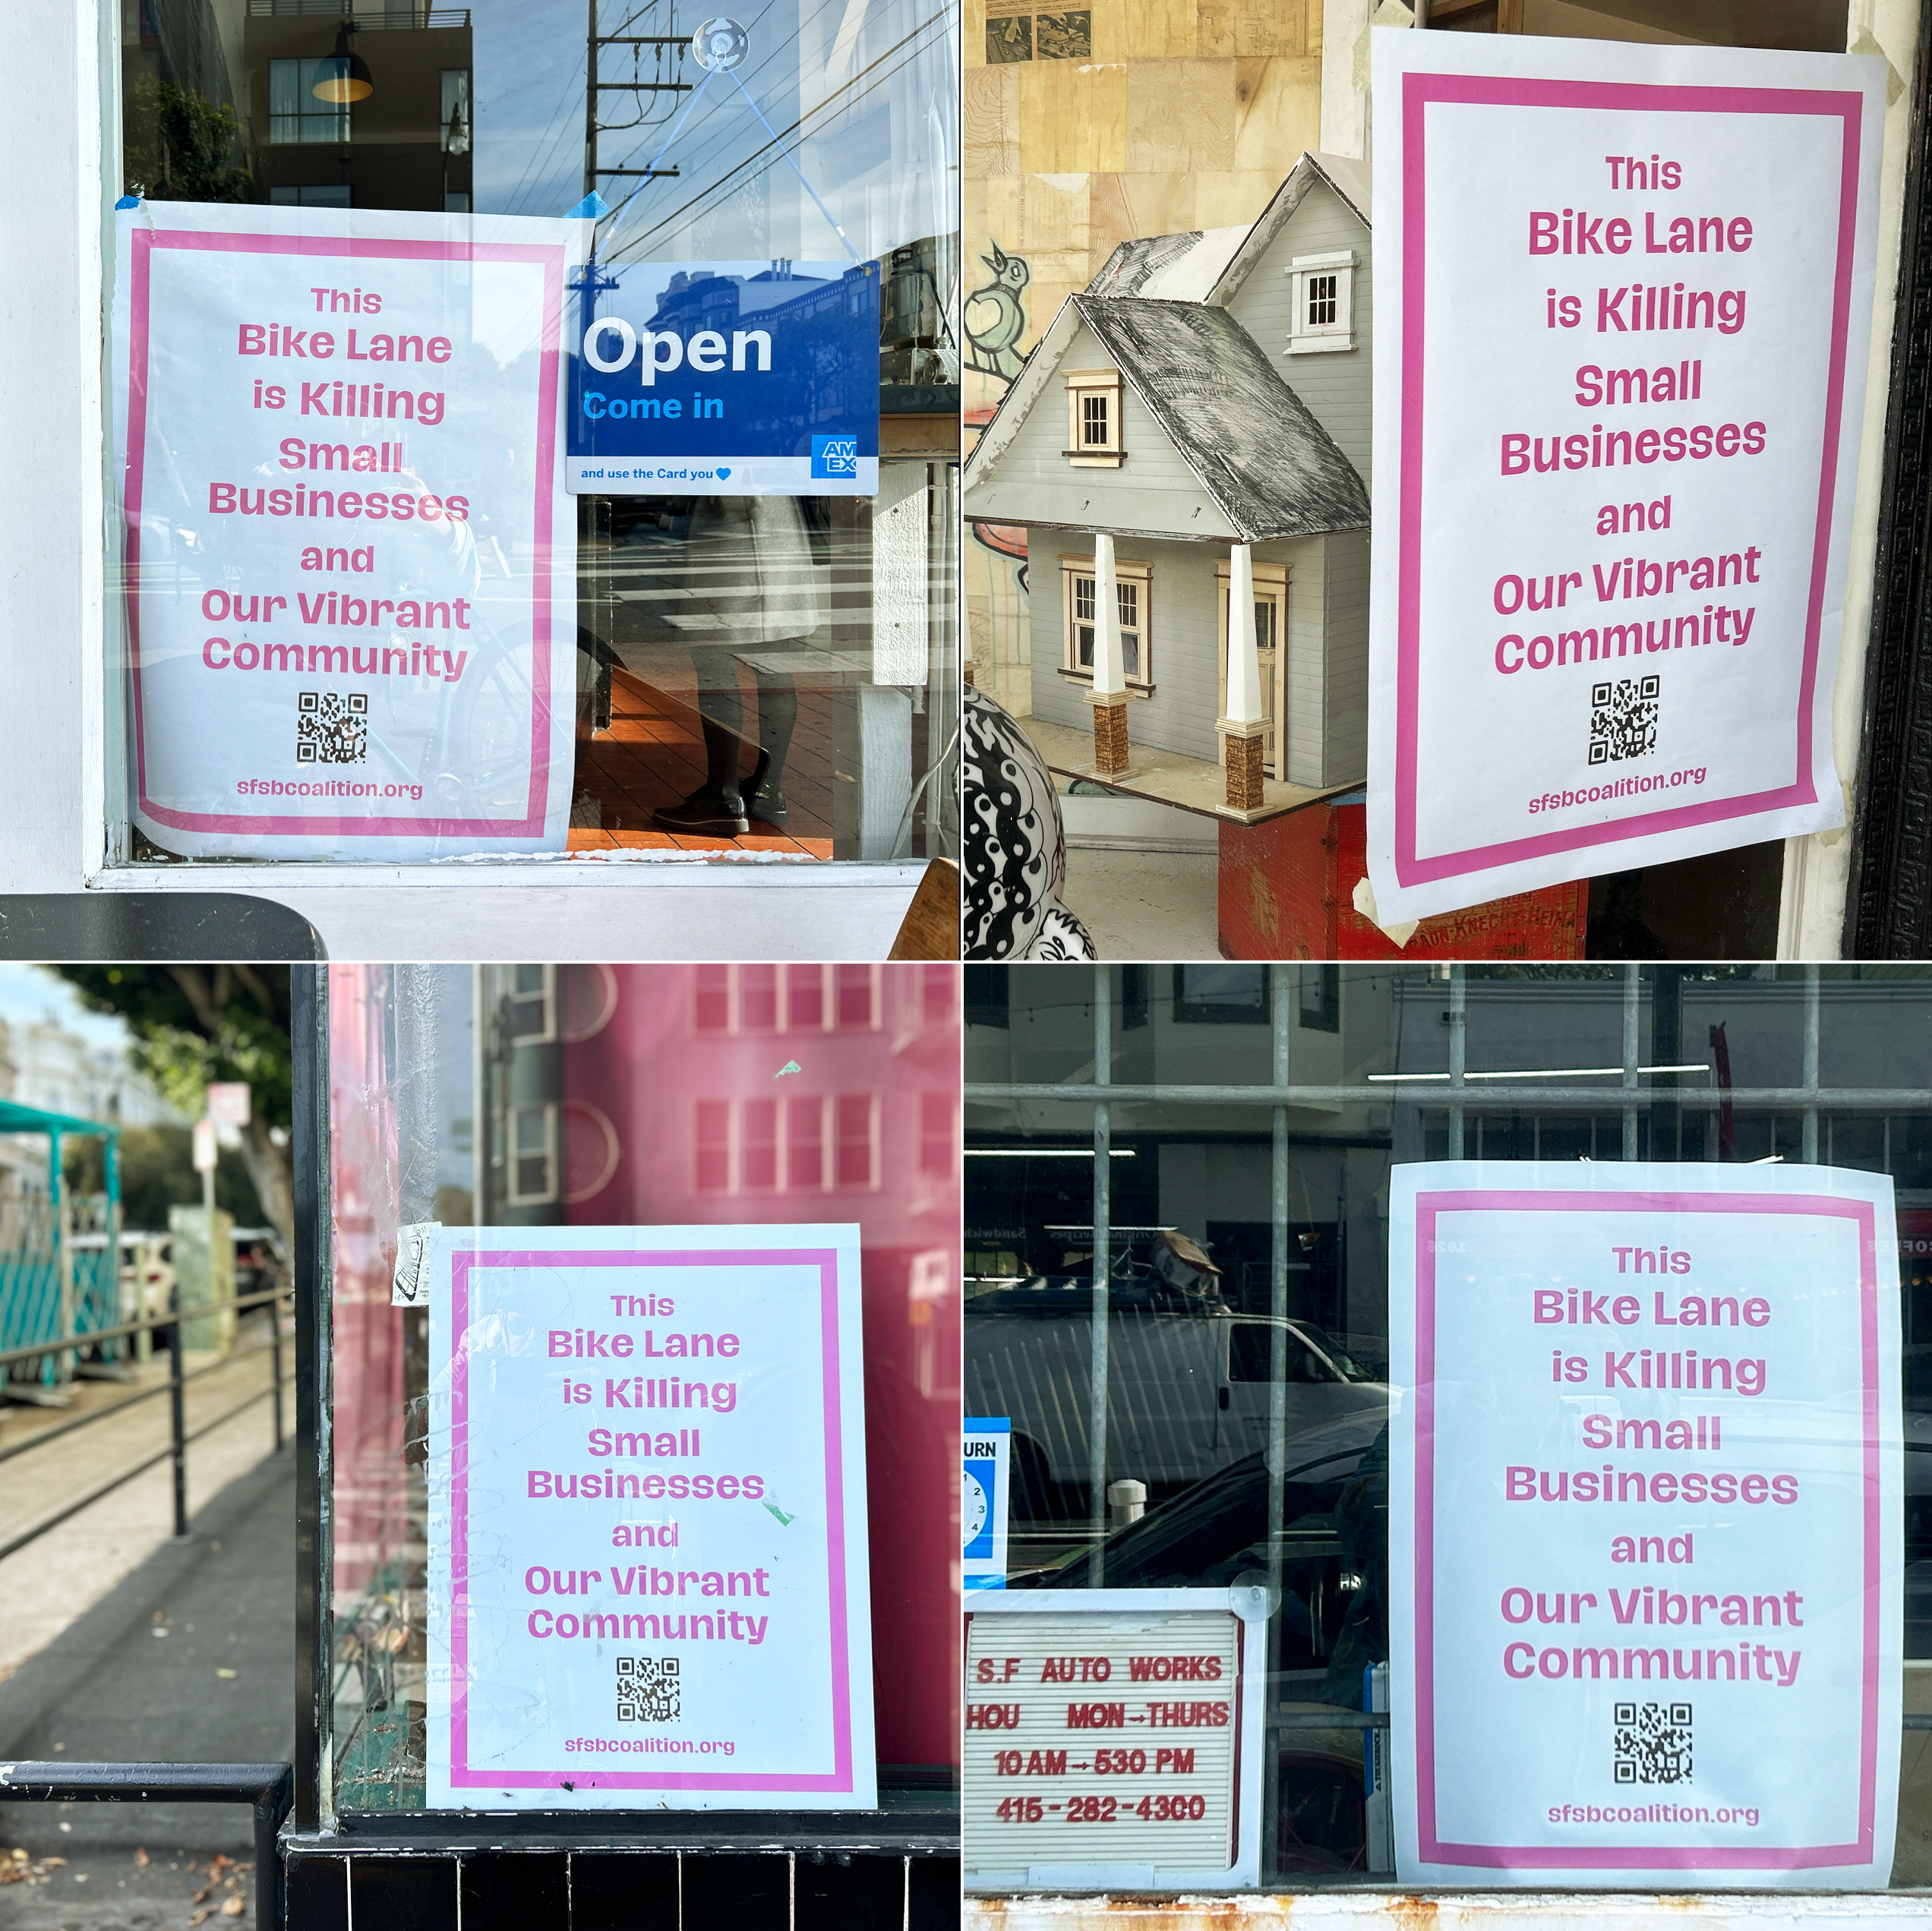 A composite image of four signs in shop windows that show opposition to a bike lane.